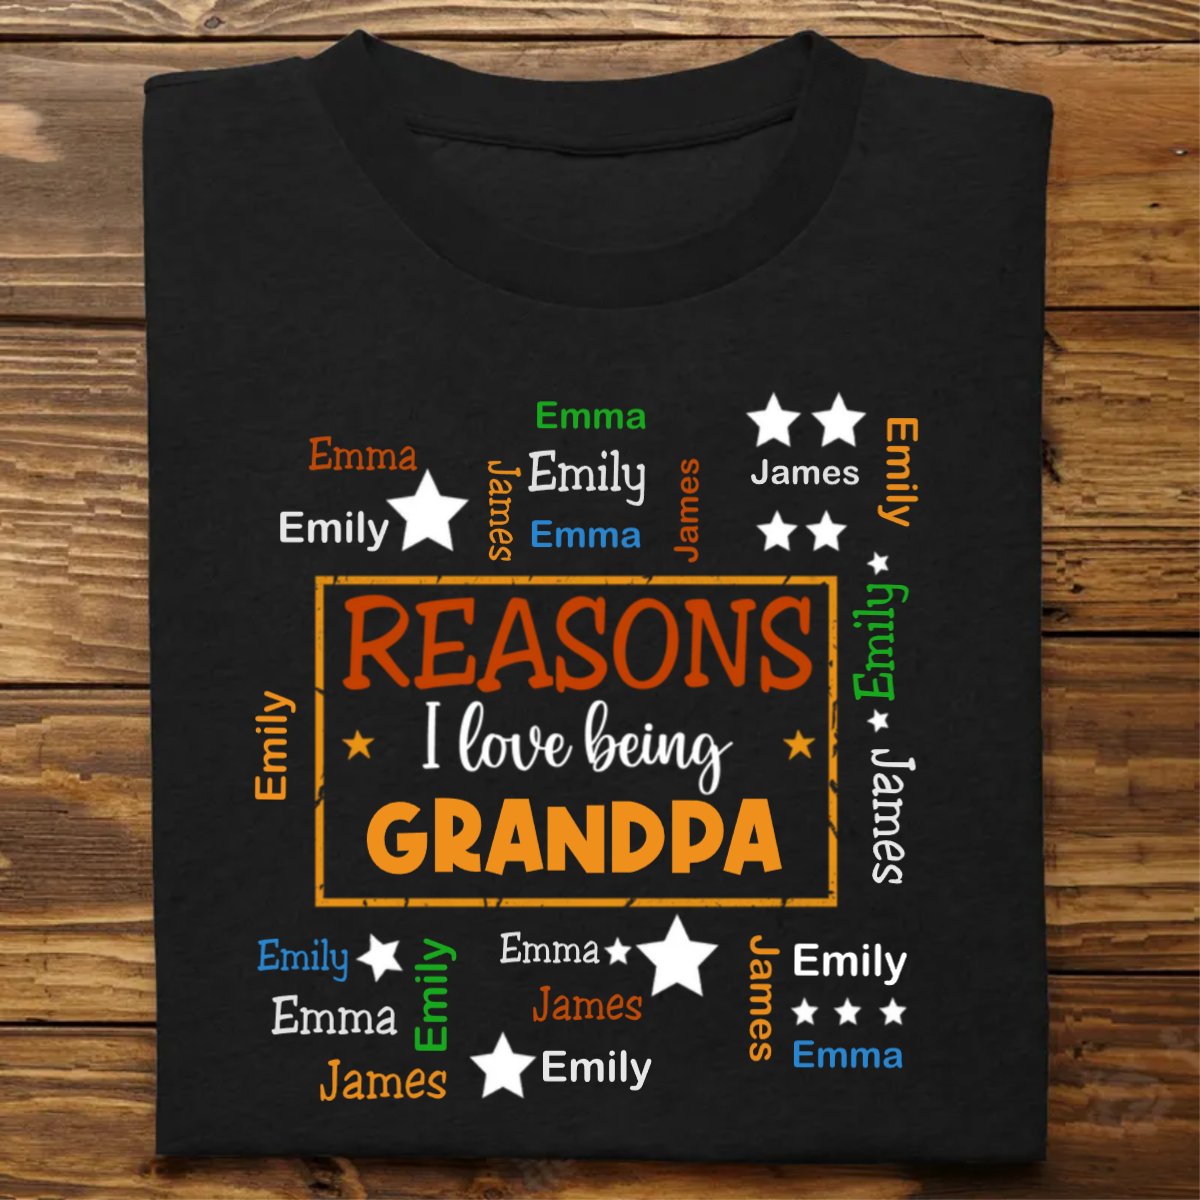 Discover Family - Reasons I Love Being Word Art - Personalized T-Shirt